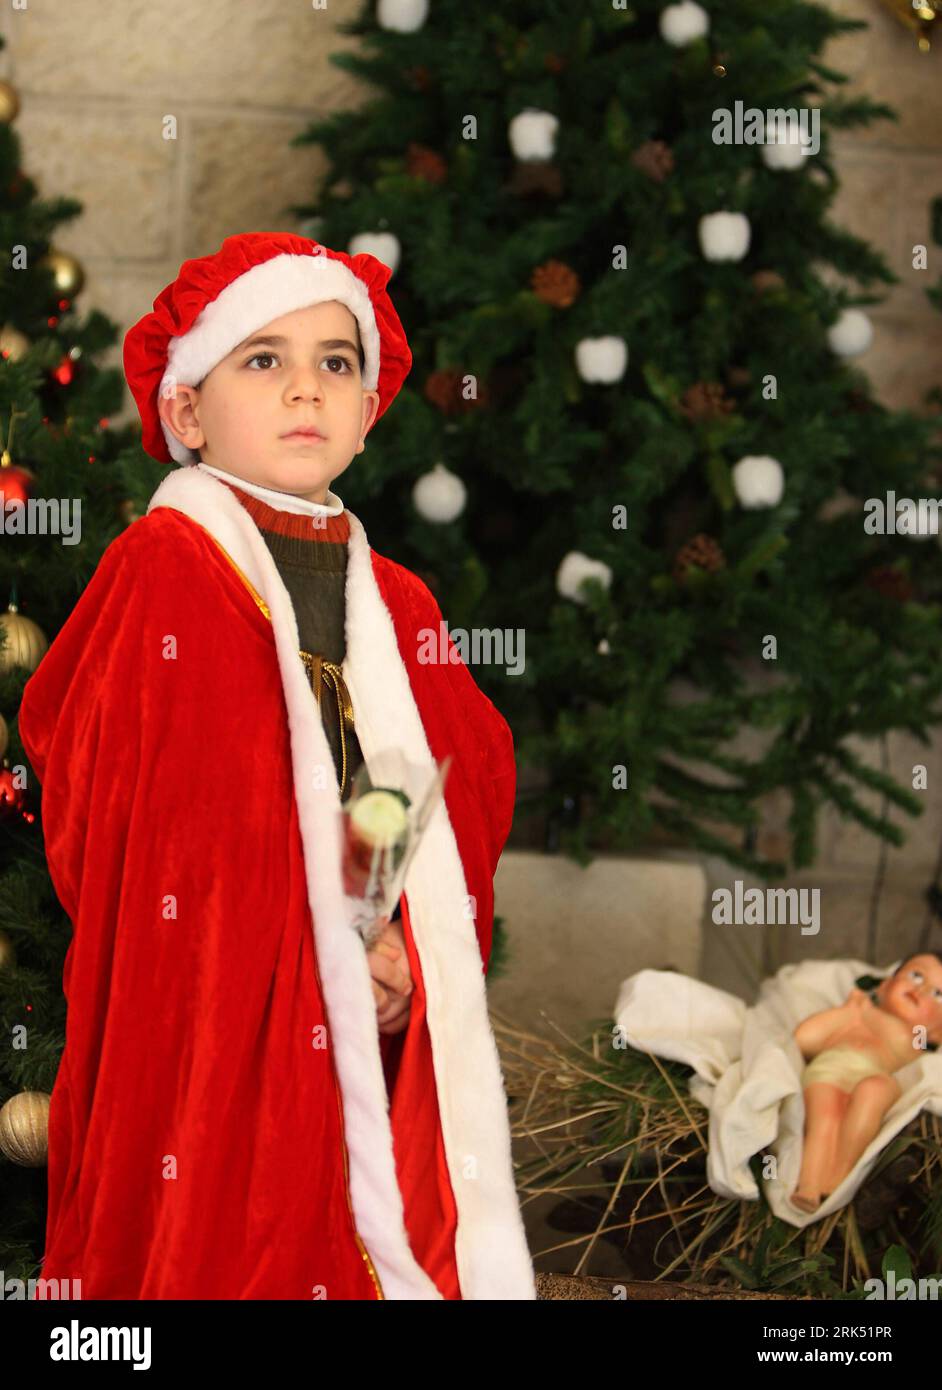 Bildnummer: 53687039  Datum: 24.12.2009  Copyright: imago/Xinhua (091224) -- BETHLEHEM, Dec. 24, 2009 (Xinhua) -- A child in Santa Claus outfit poses for photos at the Church of Nativity in the West Bank city of Bethlehem Dec. 24, 2009. Some 70,000 tourists are expected to visit Bethlehem to view the Church of Nativity, believed to be the birthplace of Jesus Christ, at Christmas. (Xinhua/Zhao Yue) (zl) (1)MIDEAST-BETHLEHEM-CHRISTMAS PUBLICATIONxNOTxINxCHN Weihnachten kbdig xsk 2009 hoch o0 Kind Weihnachtsmann    Bildnummer 53687039 Date 24 12 2009 Copyright Imago XINHUA  Bethlehem DEC 24 2009 Stock Photo